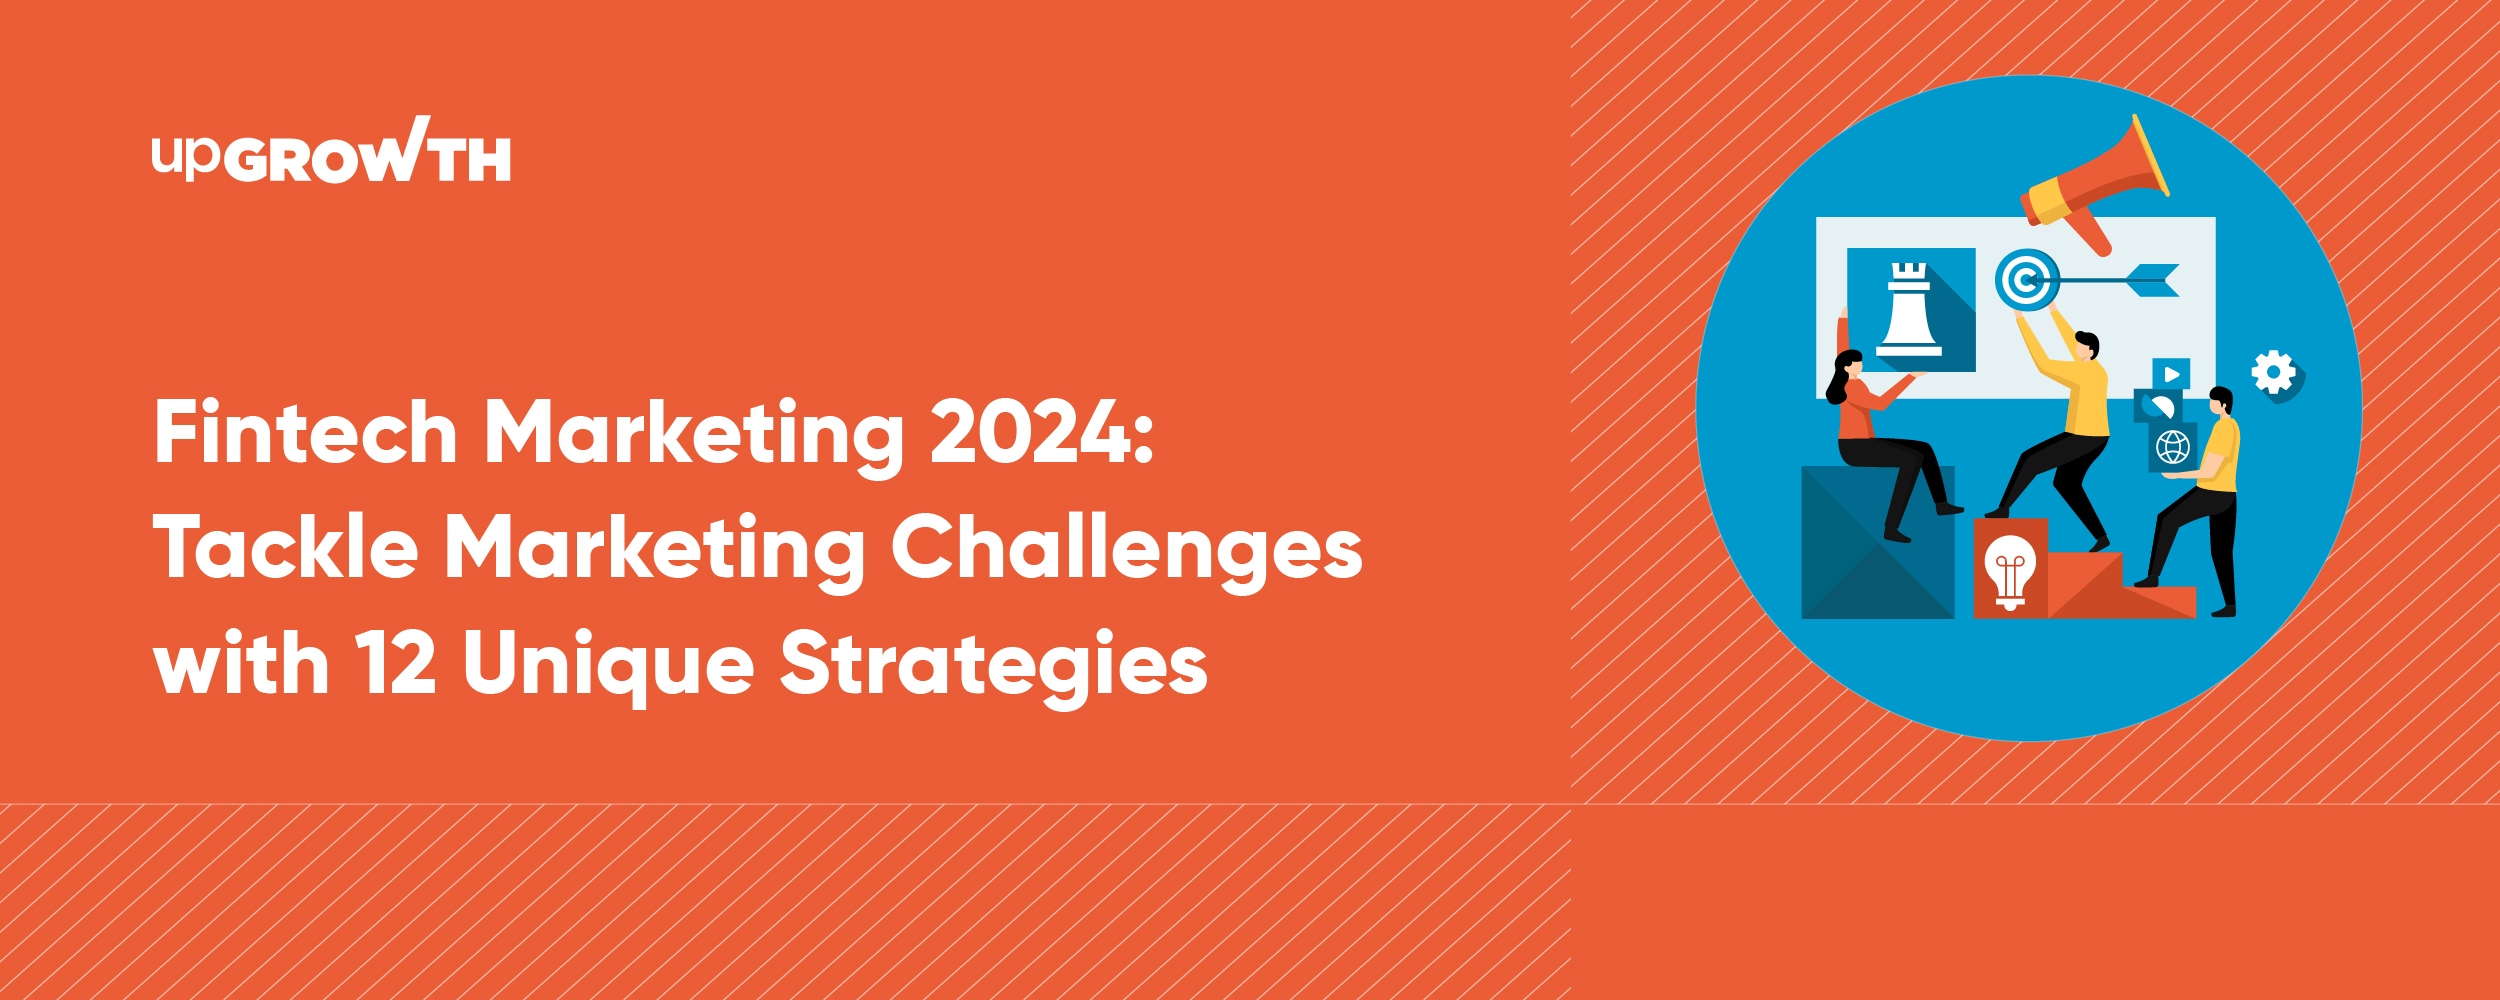 Fintech Marketing 2024 Tackle Marketing Challenges with 12 Unique Strategies-13